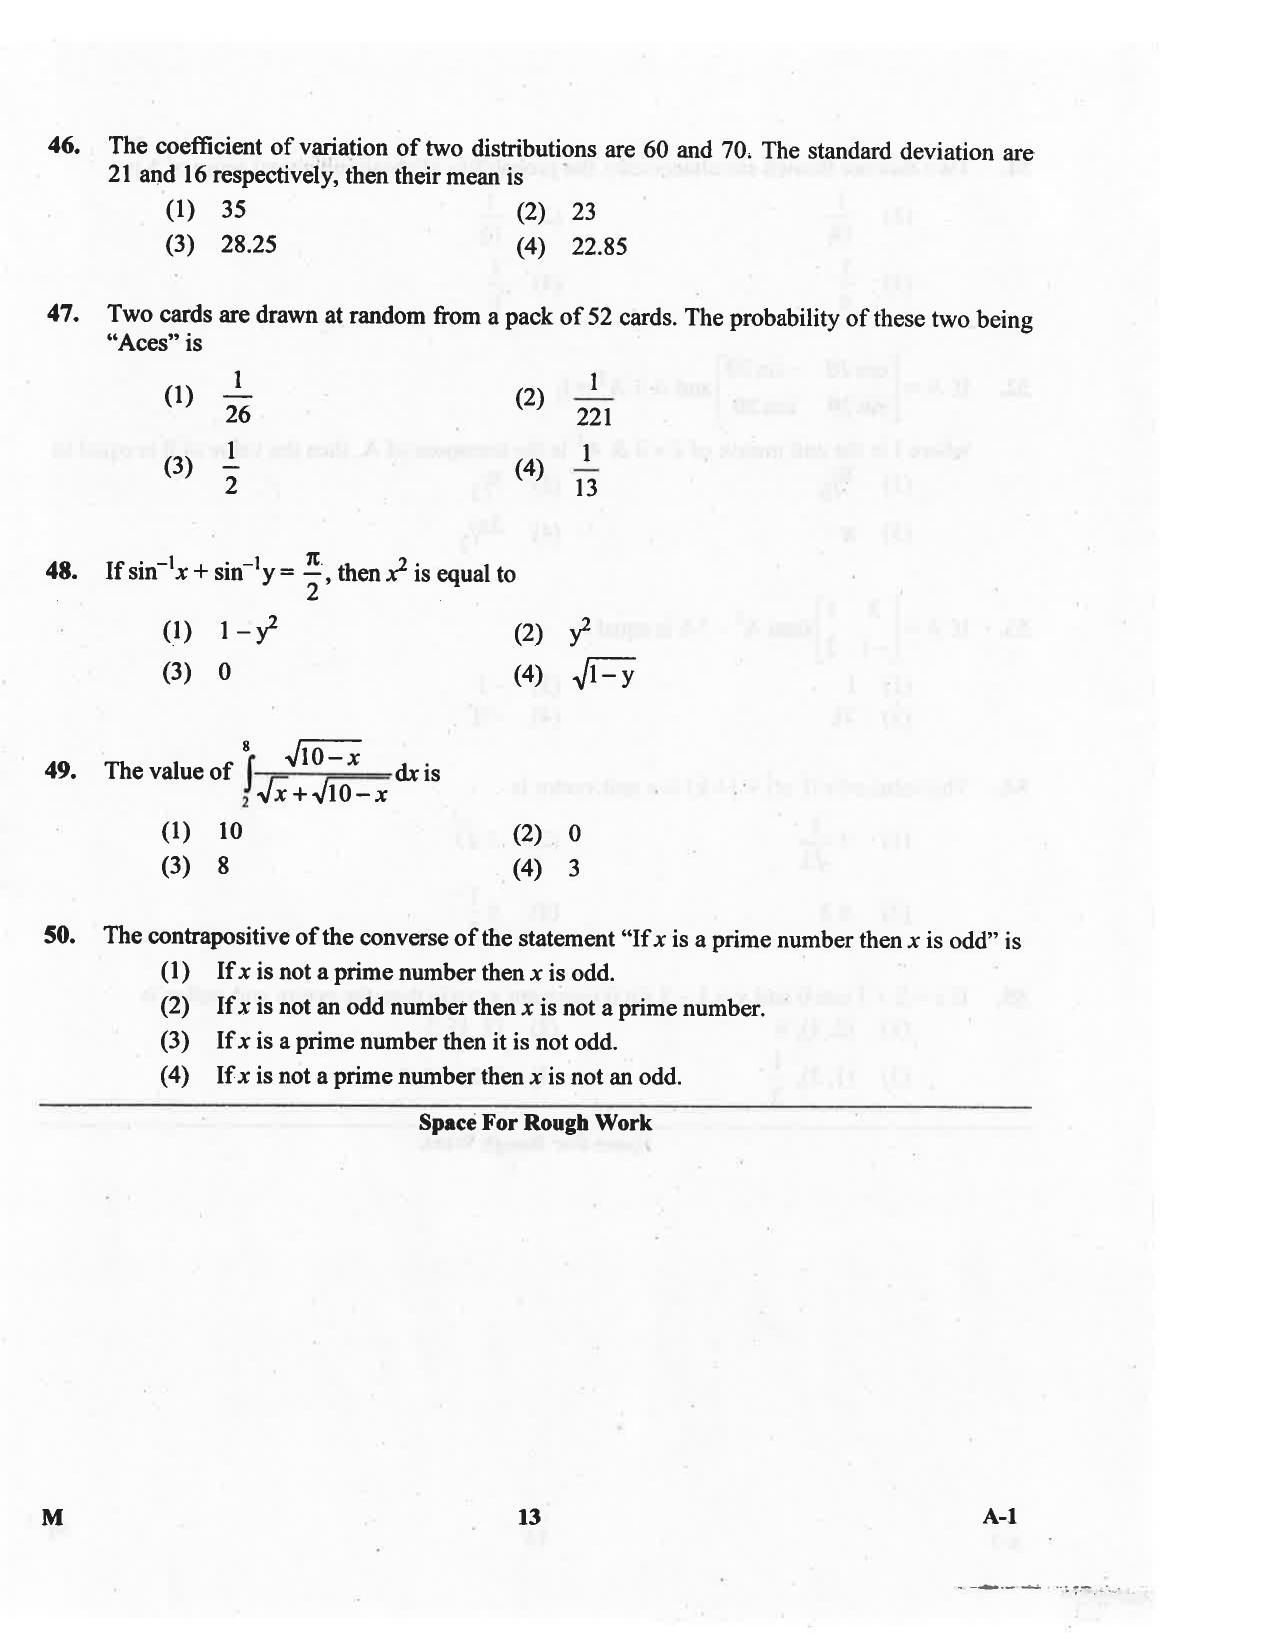 KCET Mathematics 2016 Question Papers - Page 13